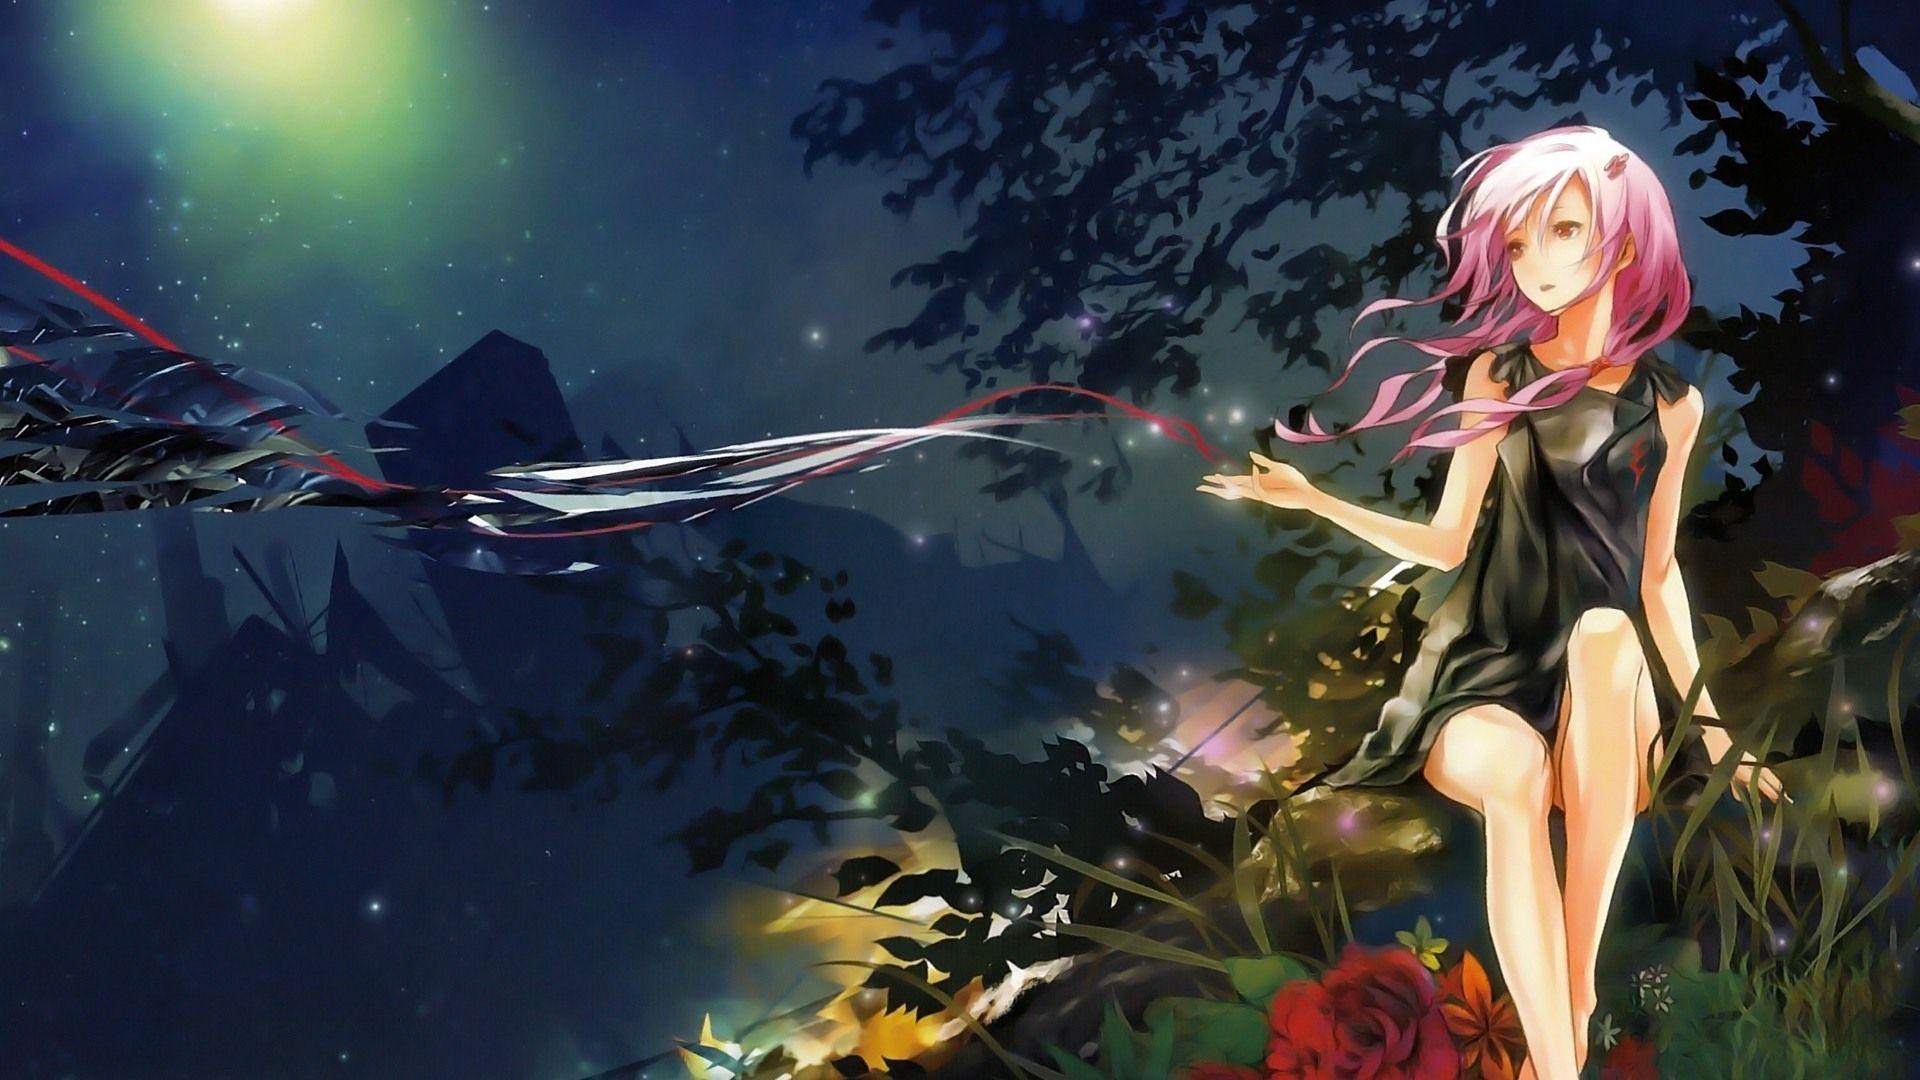 Download Anime Hd Wallpapers 1080p